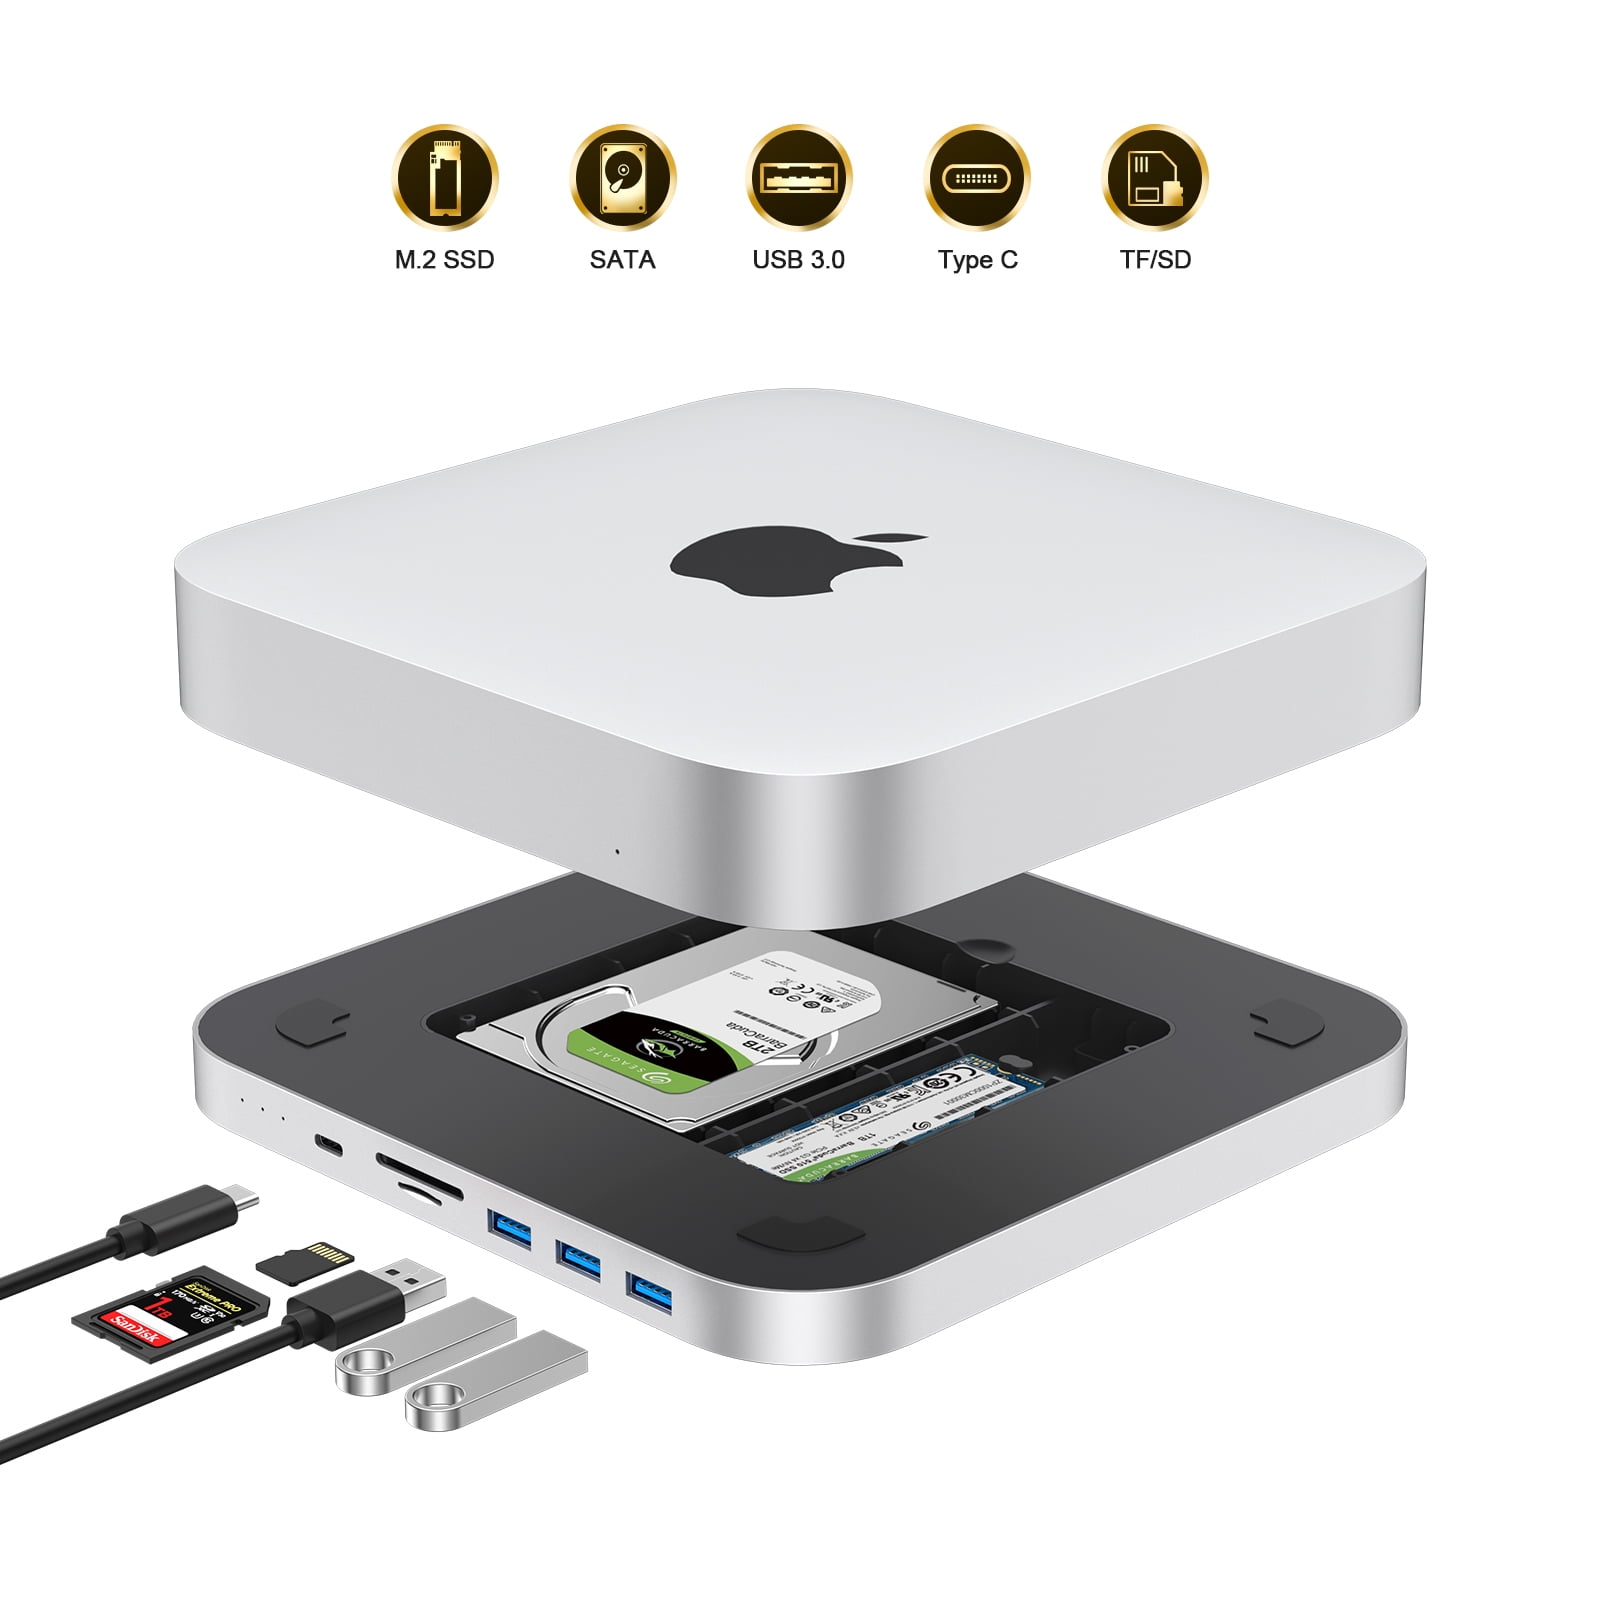 Satechi Stand and Hub for Mac mini refreshed with NVMe SSD slot